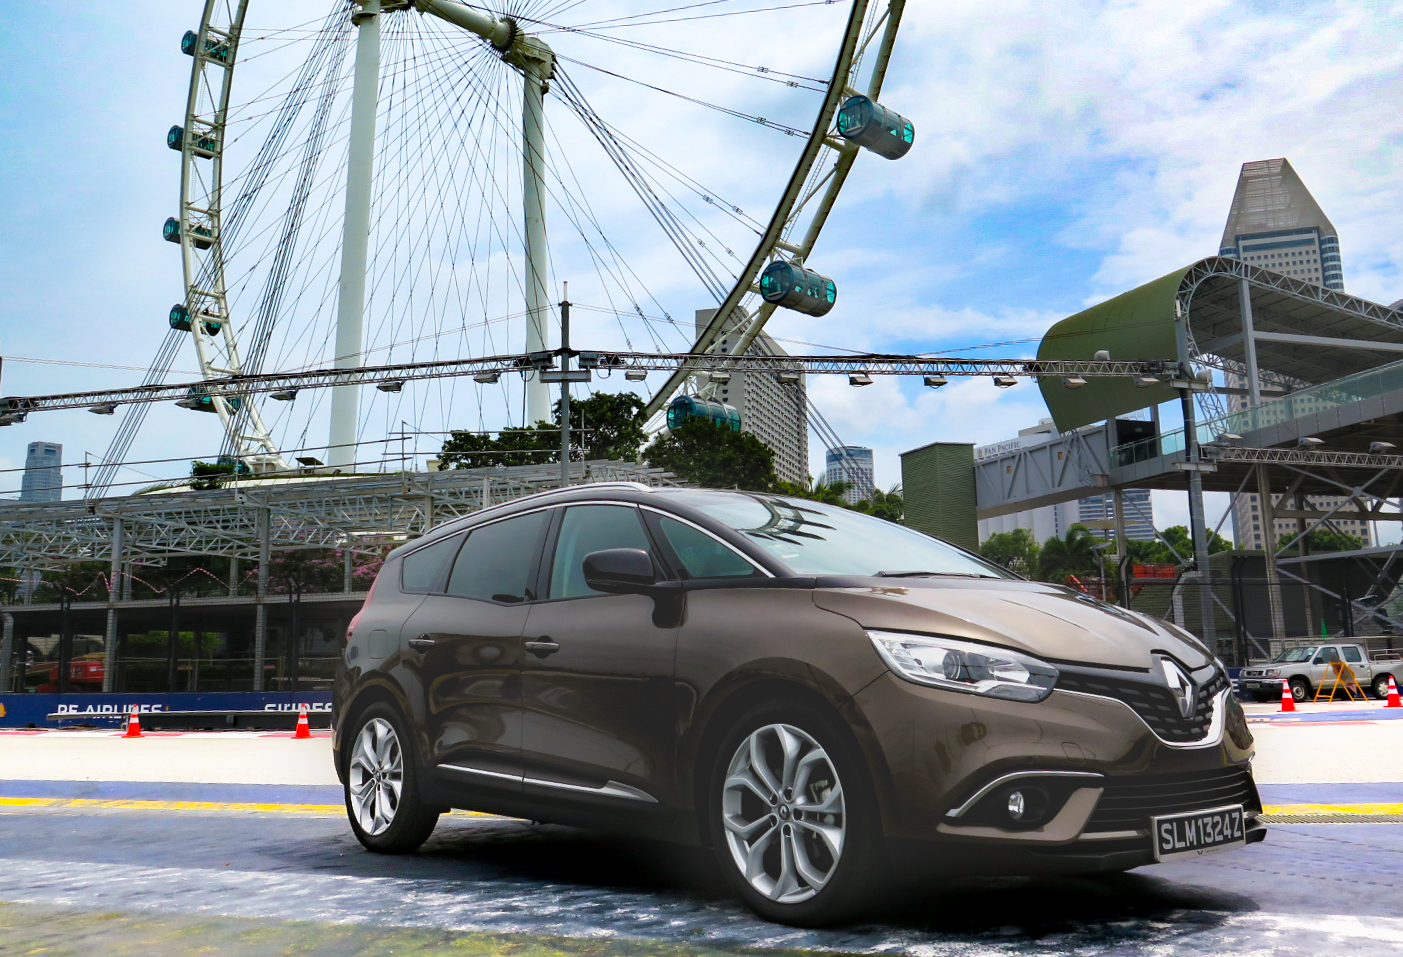 [First Drive with Carro] Renault Grand Scenic: A Grand Ride for the Family